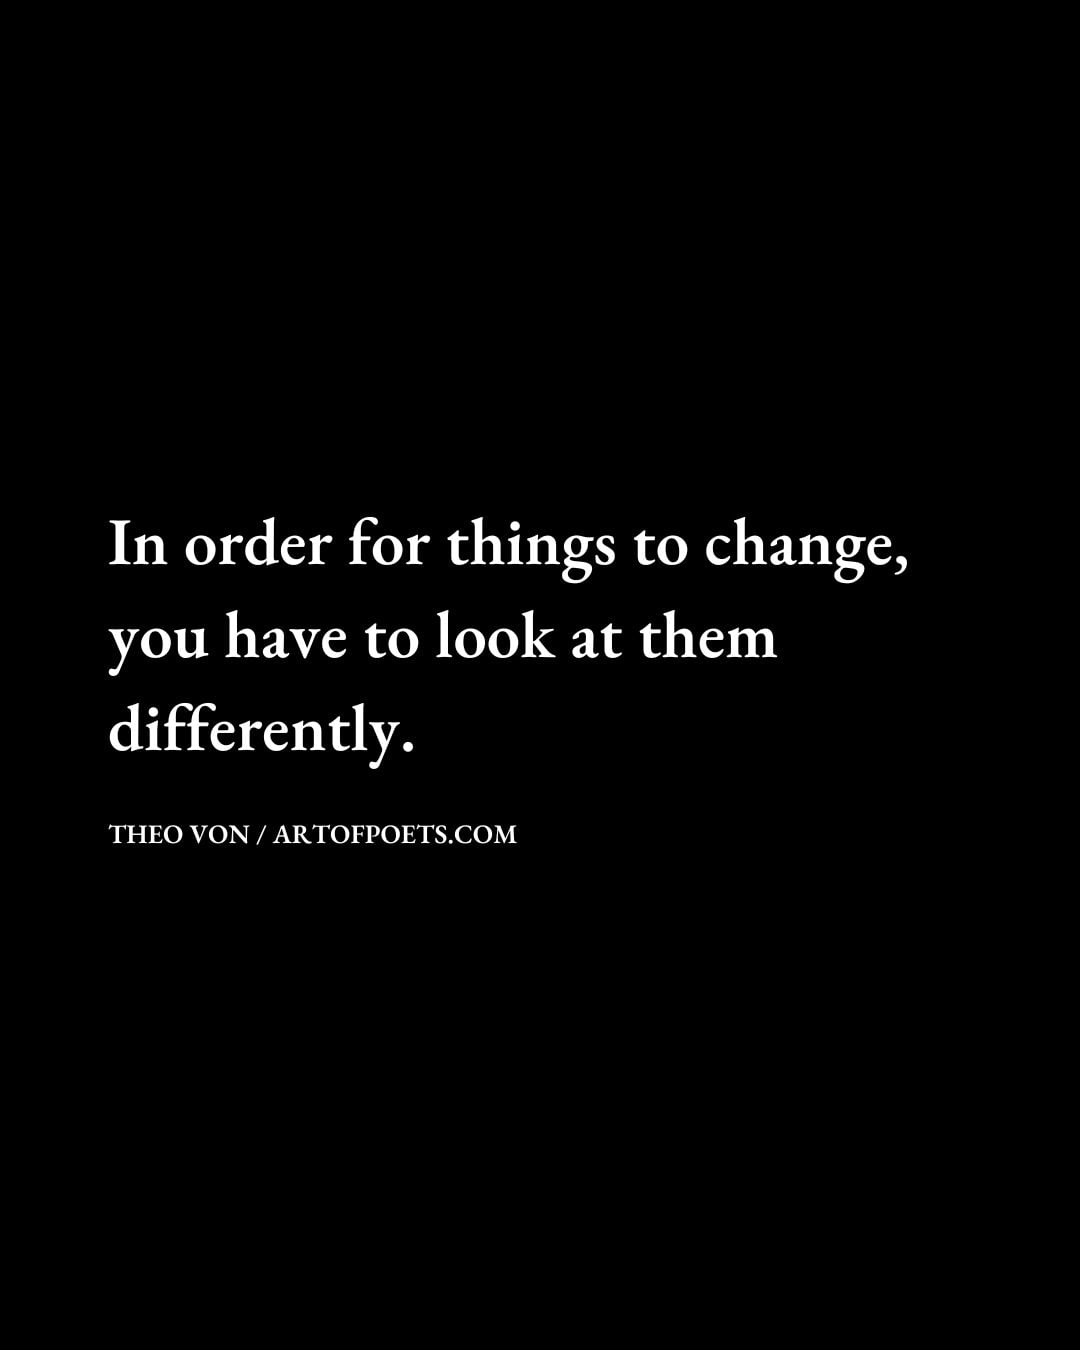 In order for things to change you have to look at them differently